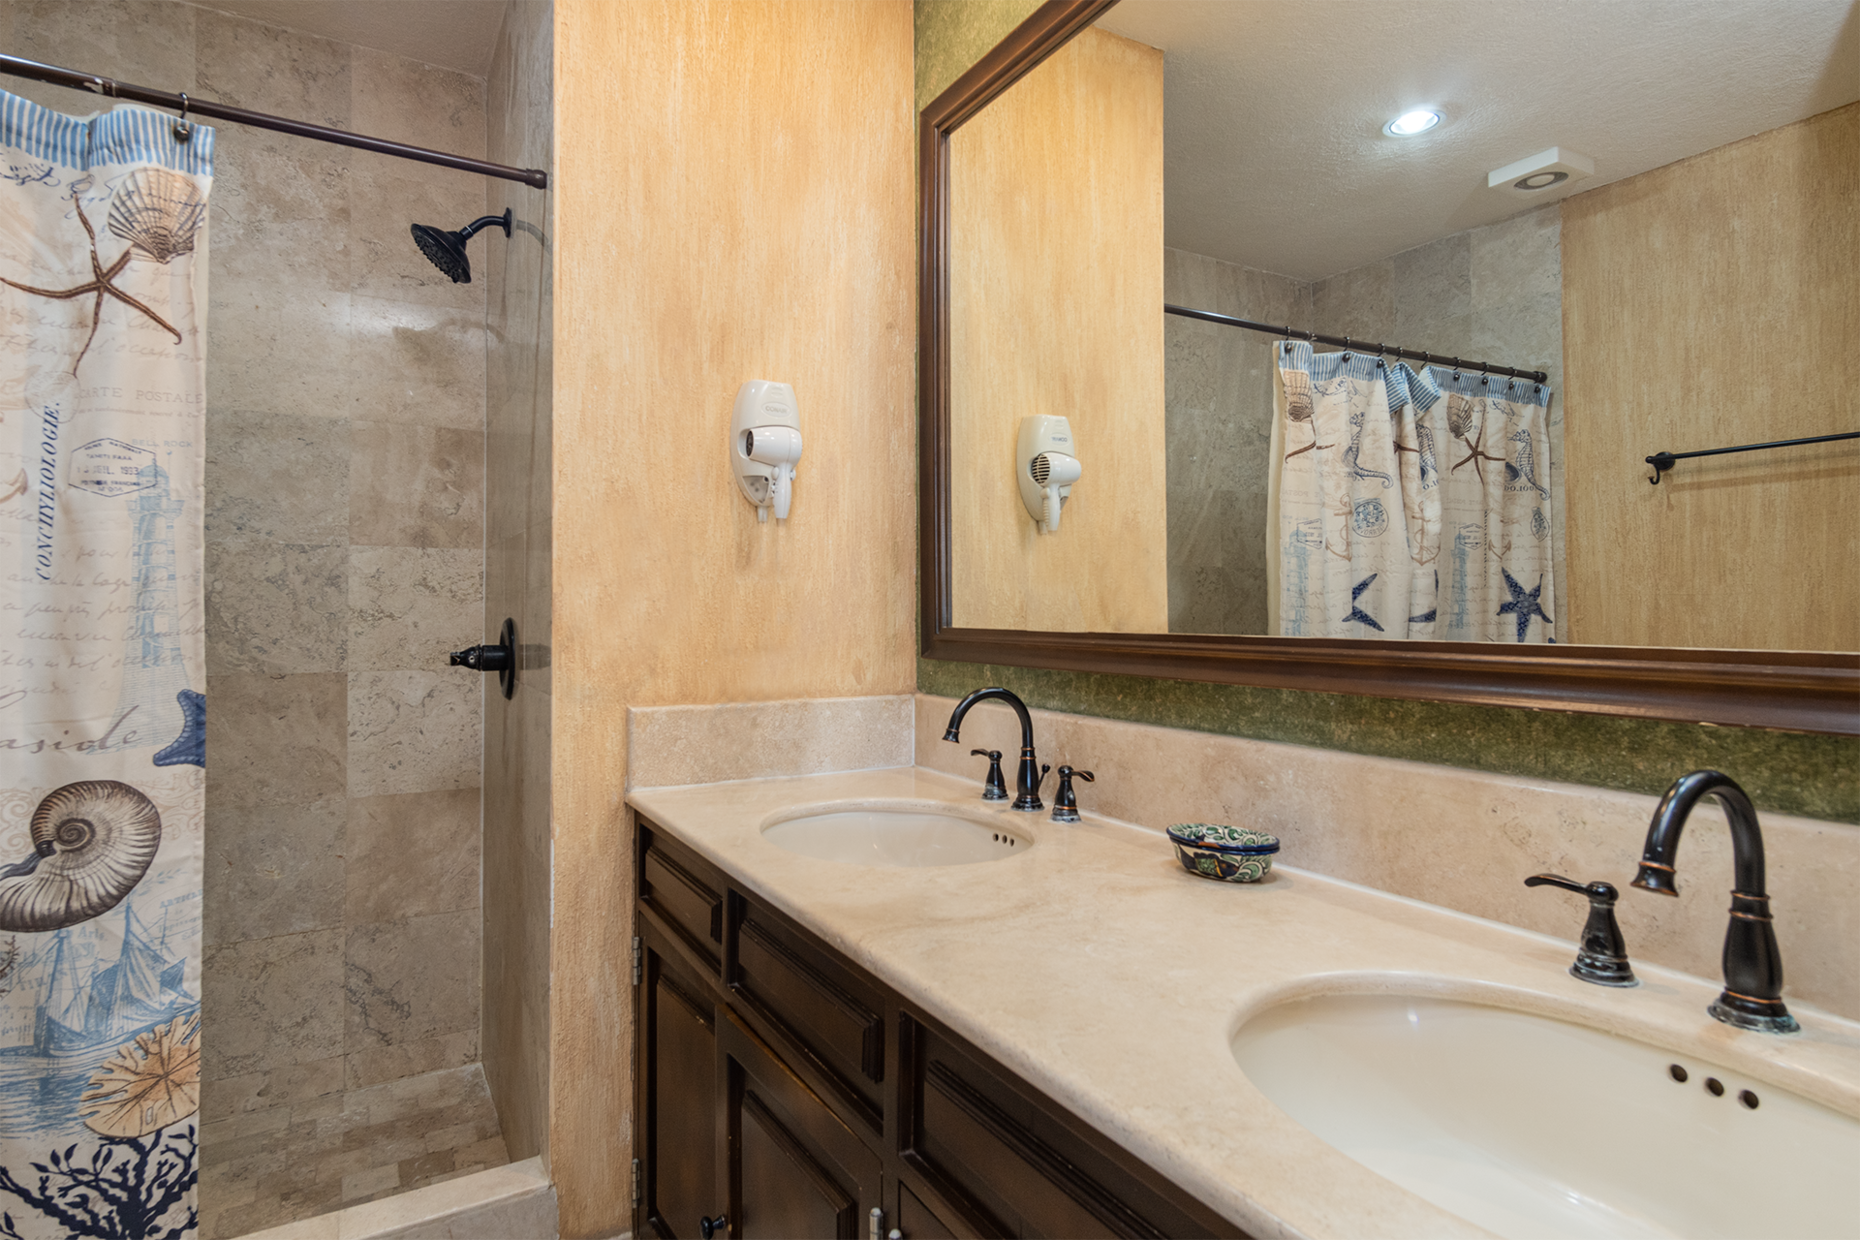 The main bathroom is private, with a shower stall and vanity.